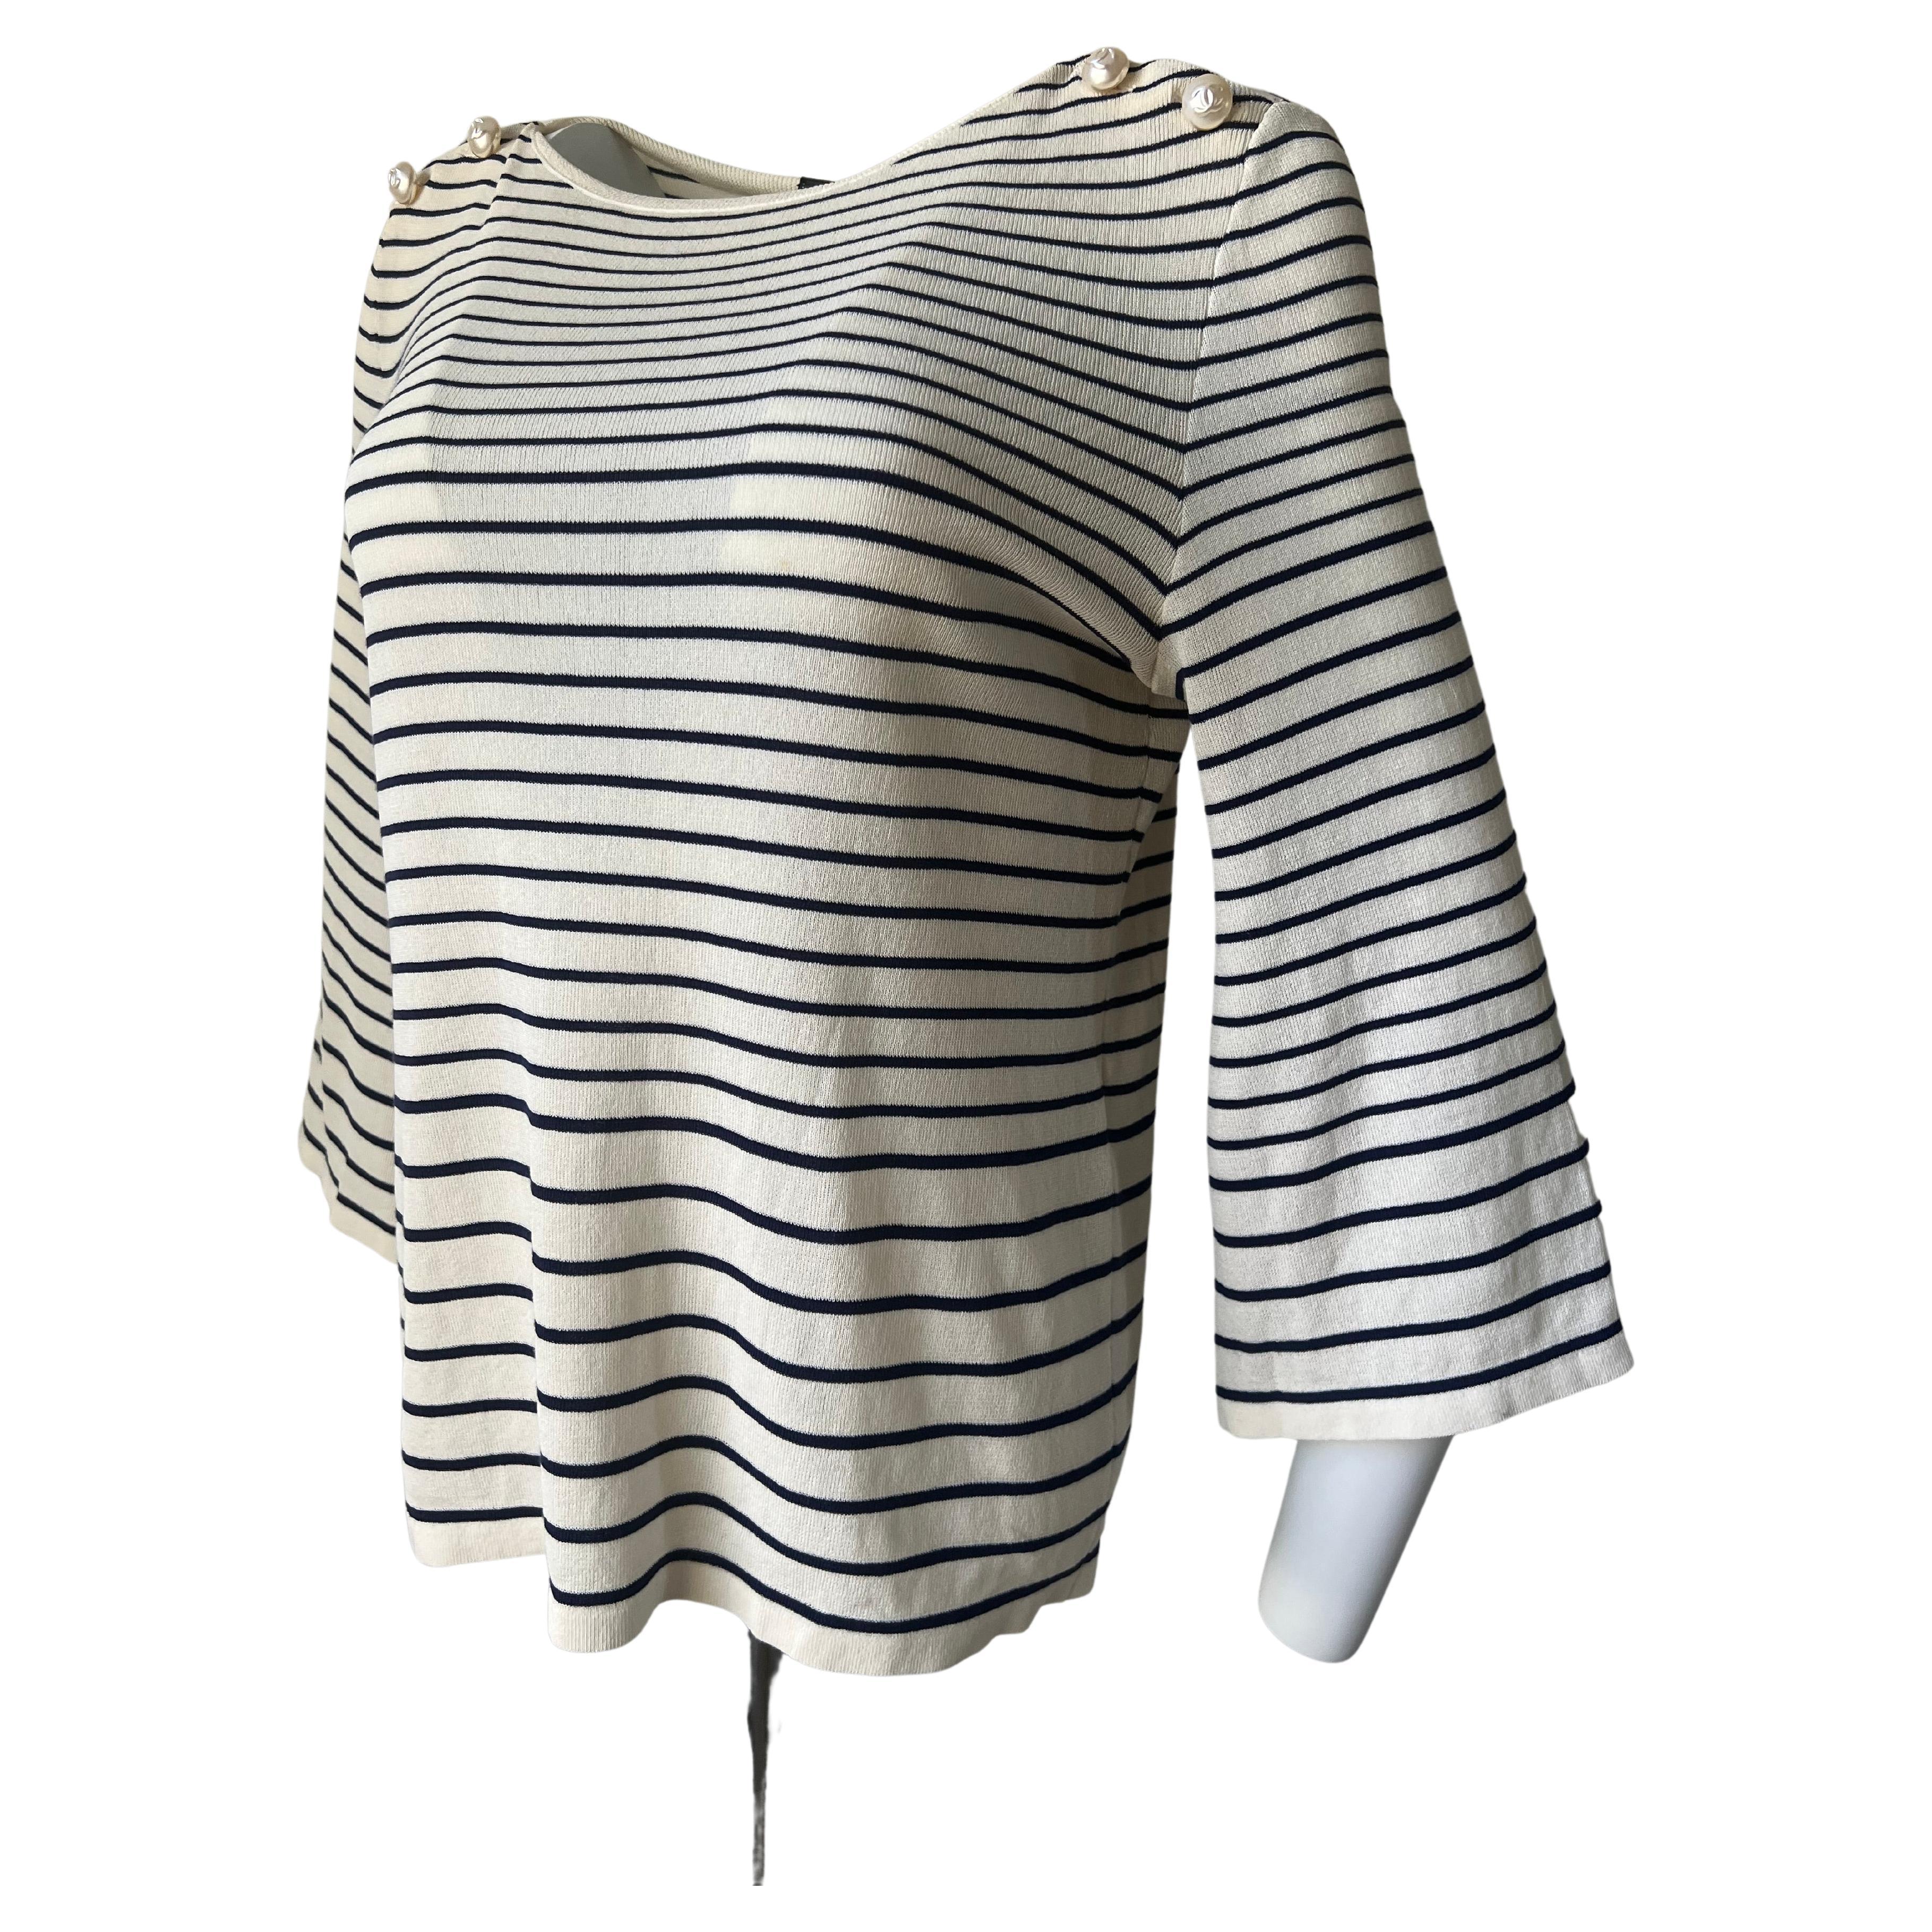 French Sailor Chanel White and Blue Striped  